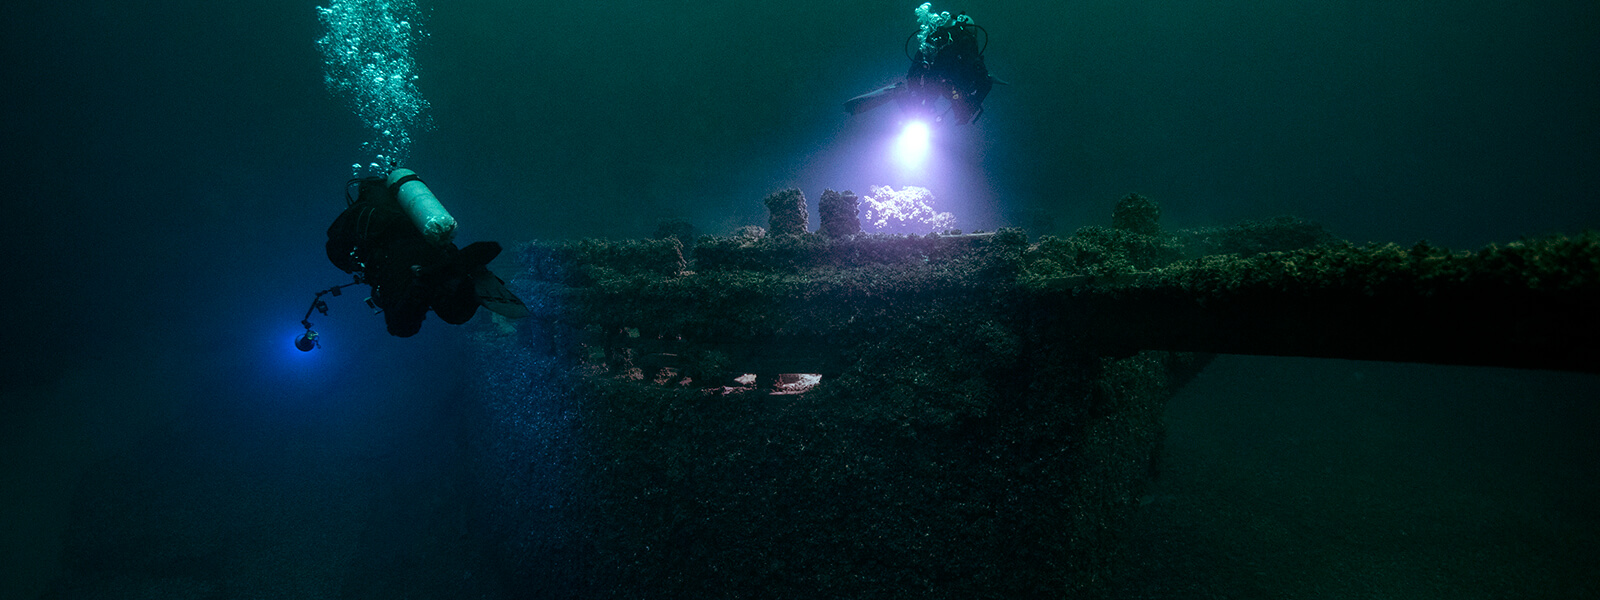 Two diver shine lights on shipwreck while they swim above it